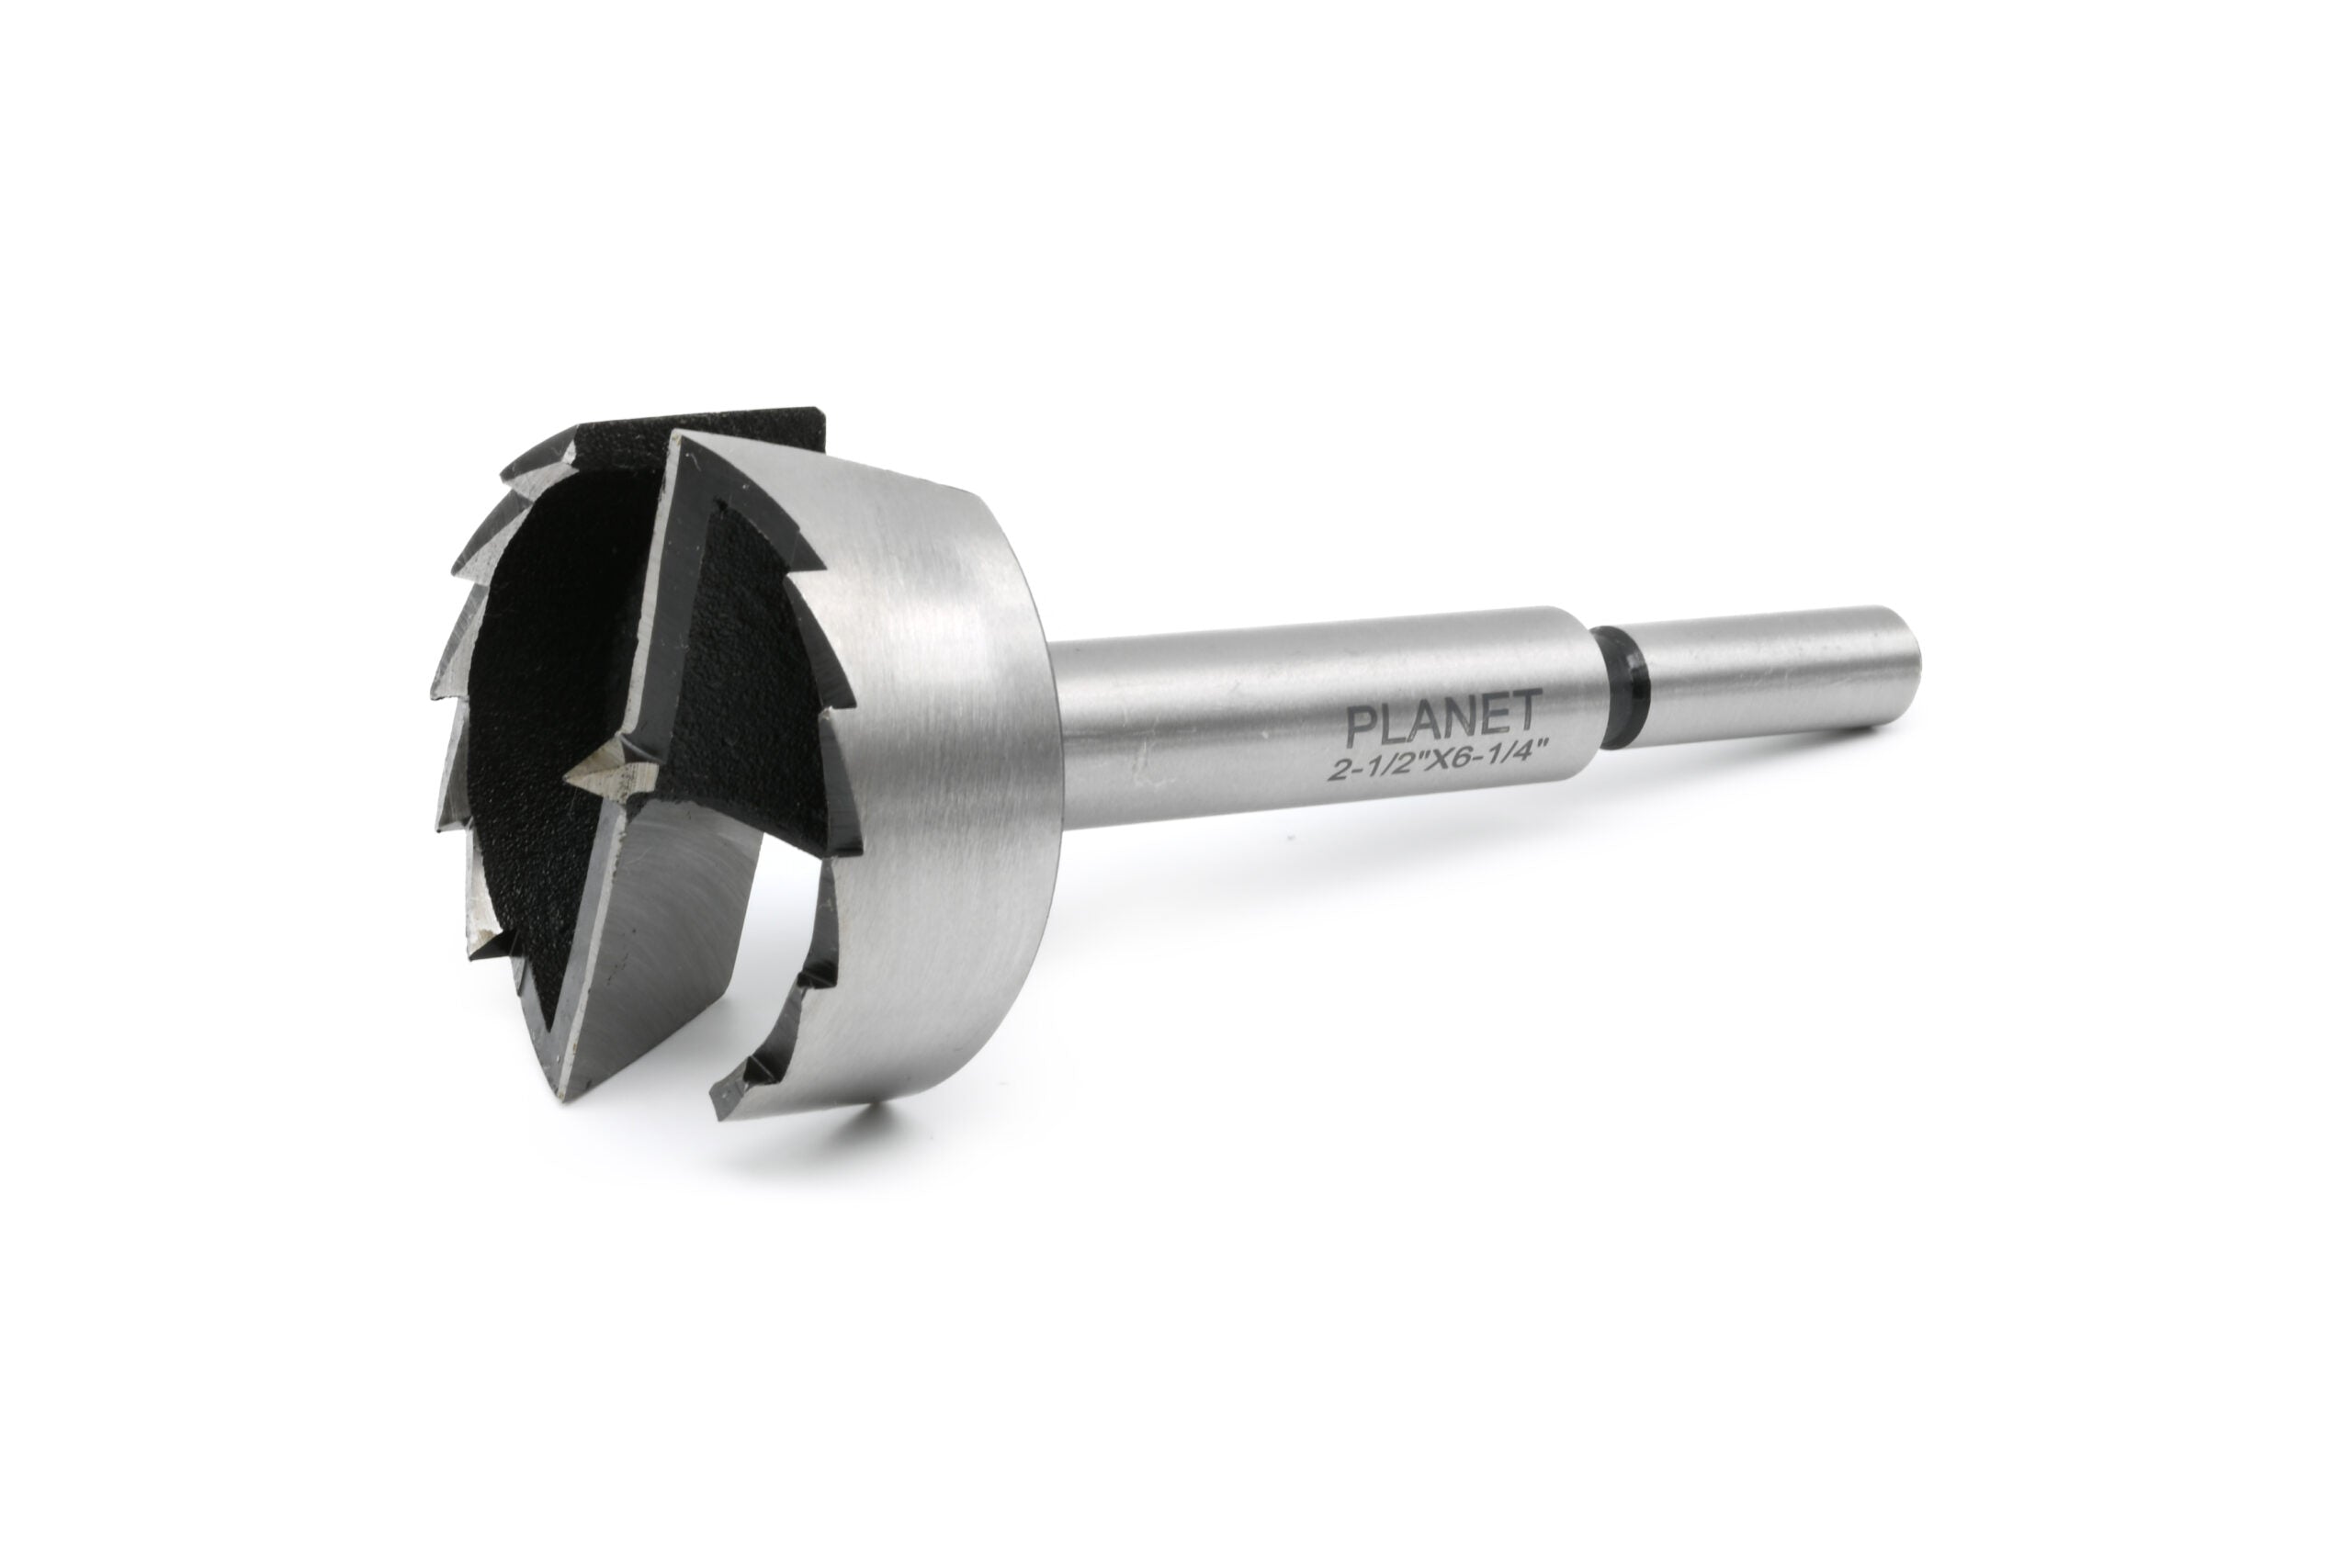 Planet Long Series Saw Tooth Forstner Bit 7/8" 22.23mm